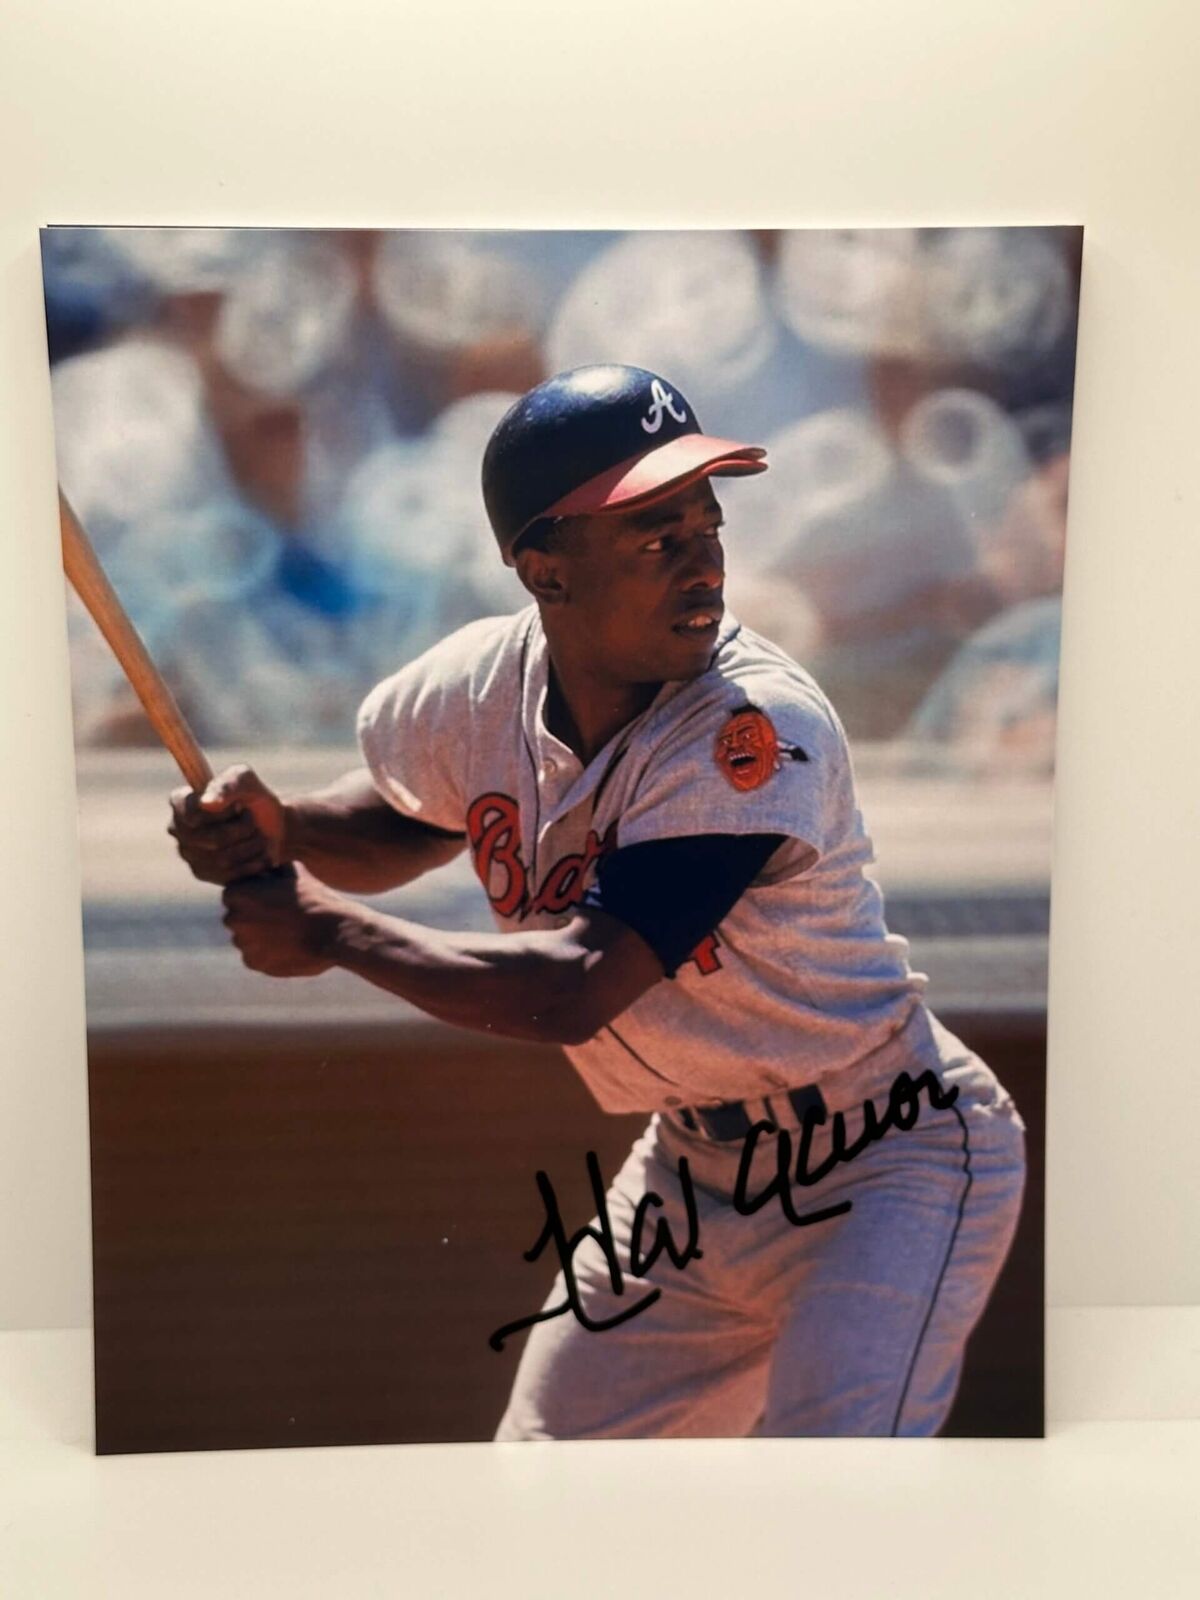 Hank Aaron 2 Signed Autographed Photo Authentic 8x10